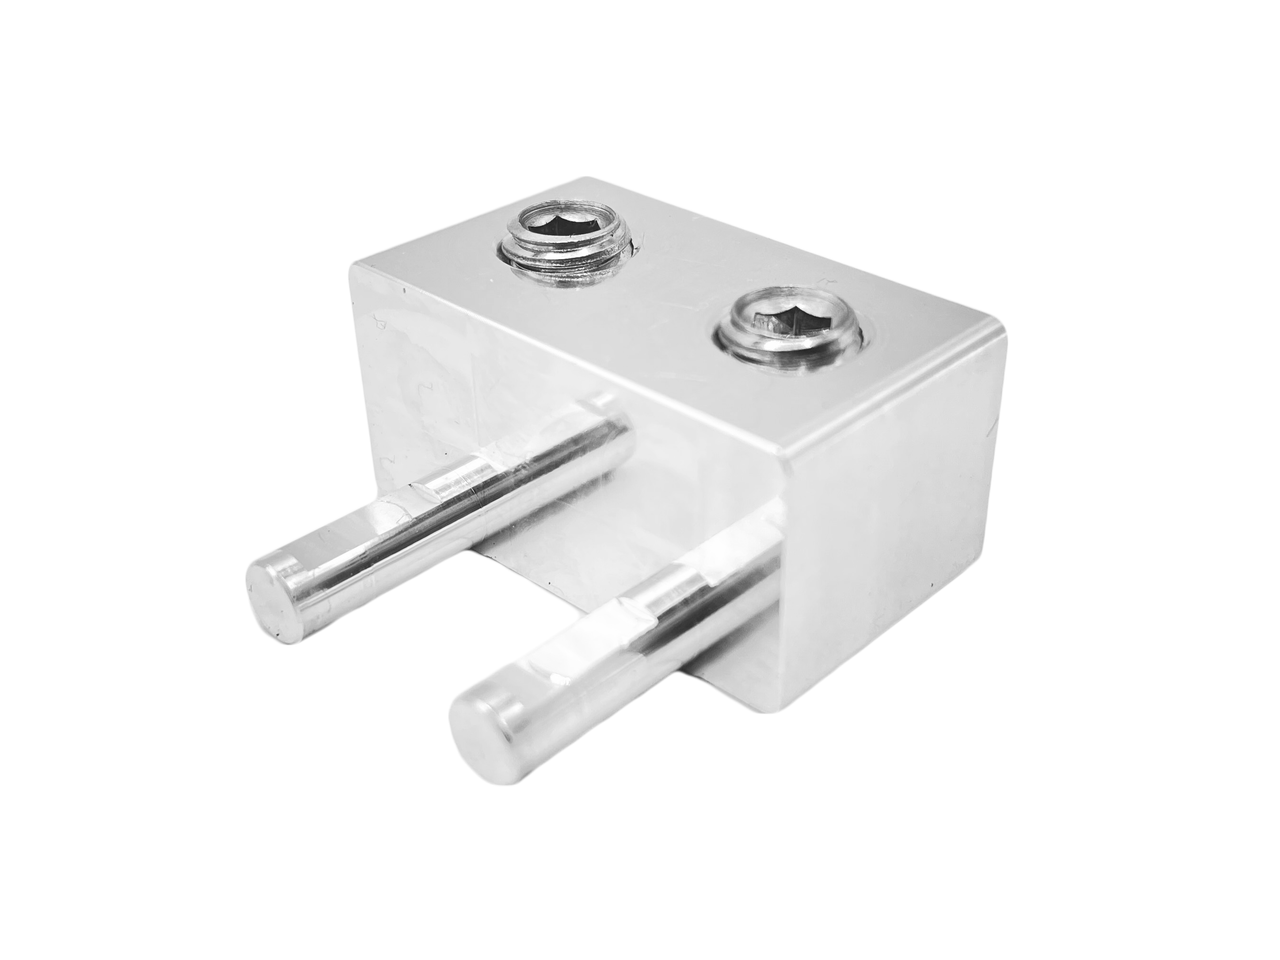 SMD LR Double Cable Adapter Block - 2 x 8AWG to 2 x 4AWG (1 Adaptor)